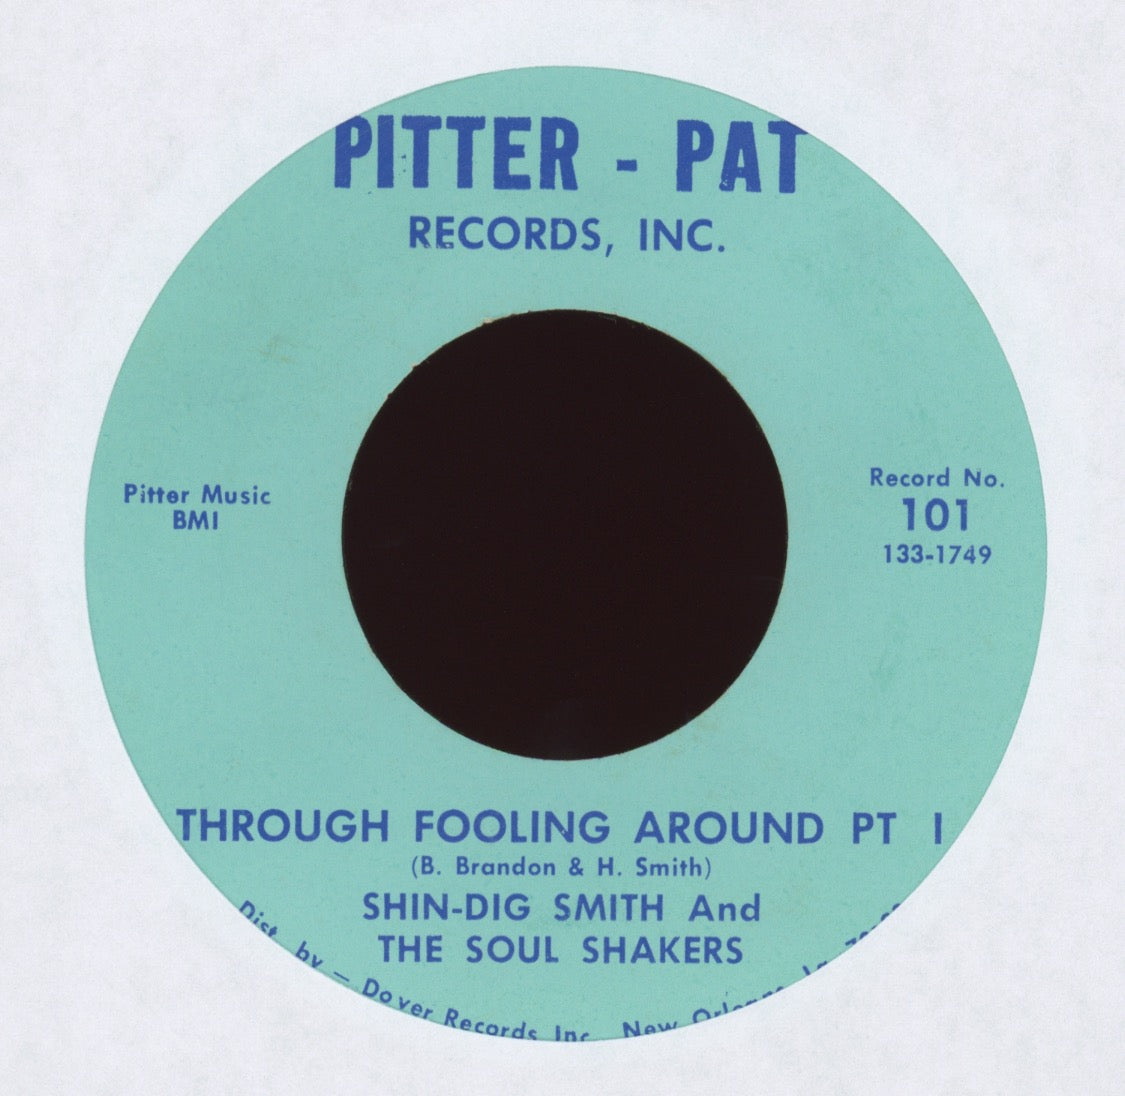 Shin-Dig Smith And The Soul Shakers - Through Fooling Around Pt. I / Pt. II on Pitter-Pat